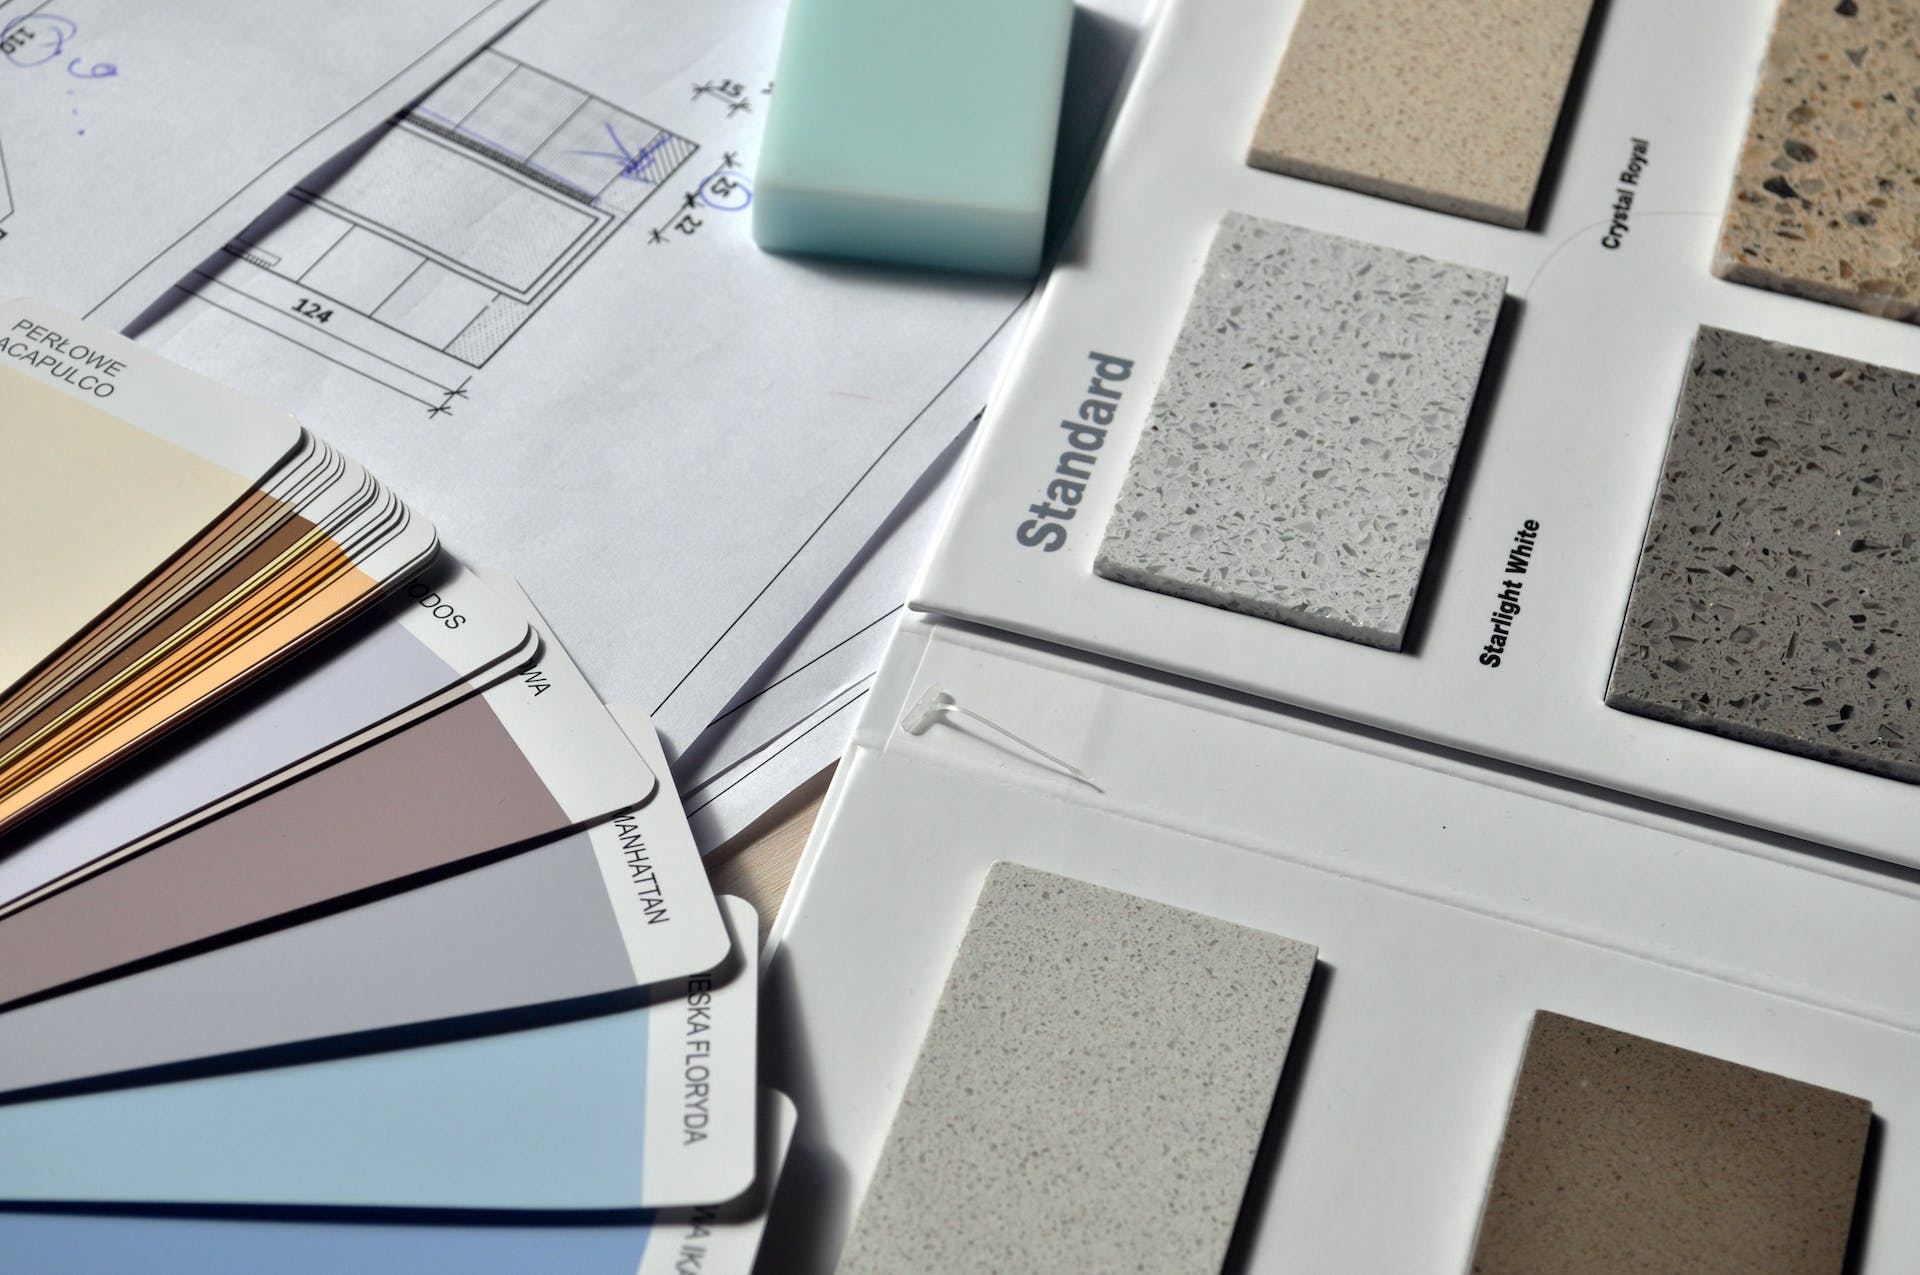 Paint and marble samples | Source: Pexels